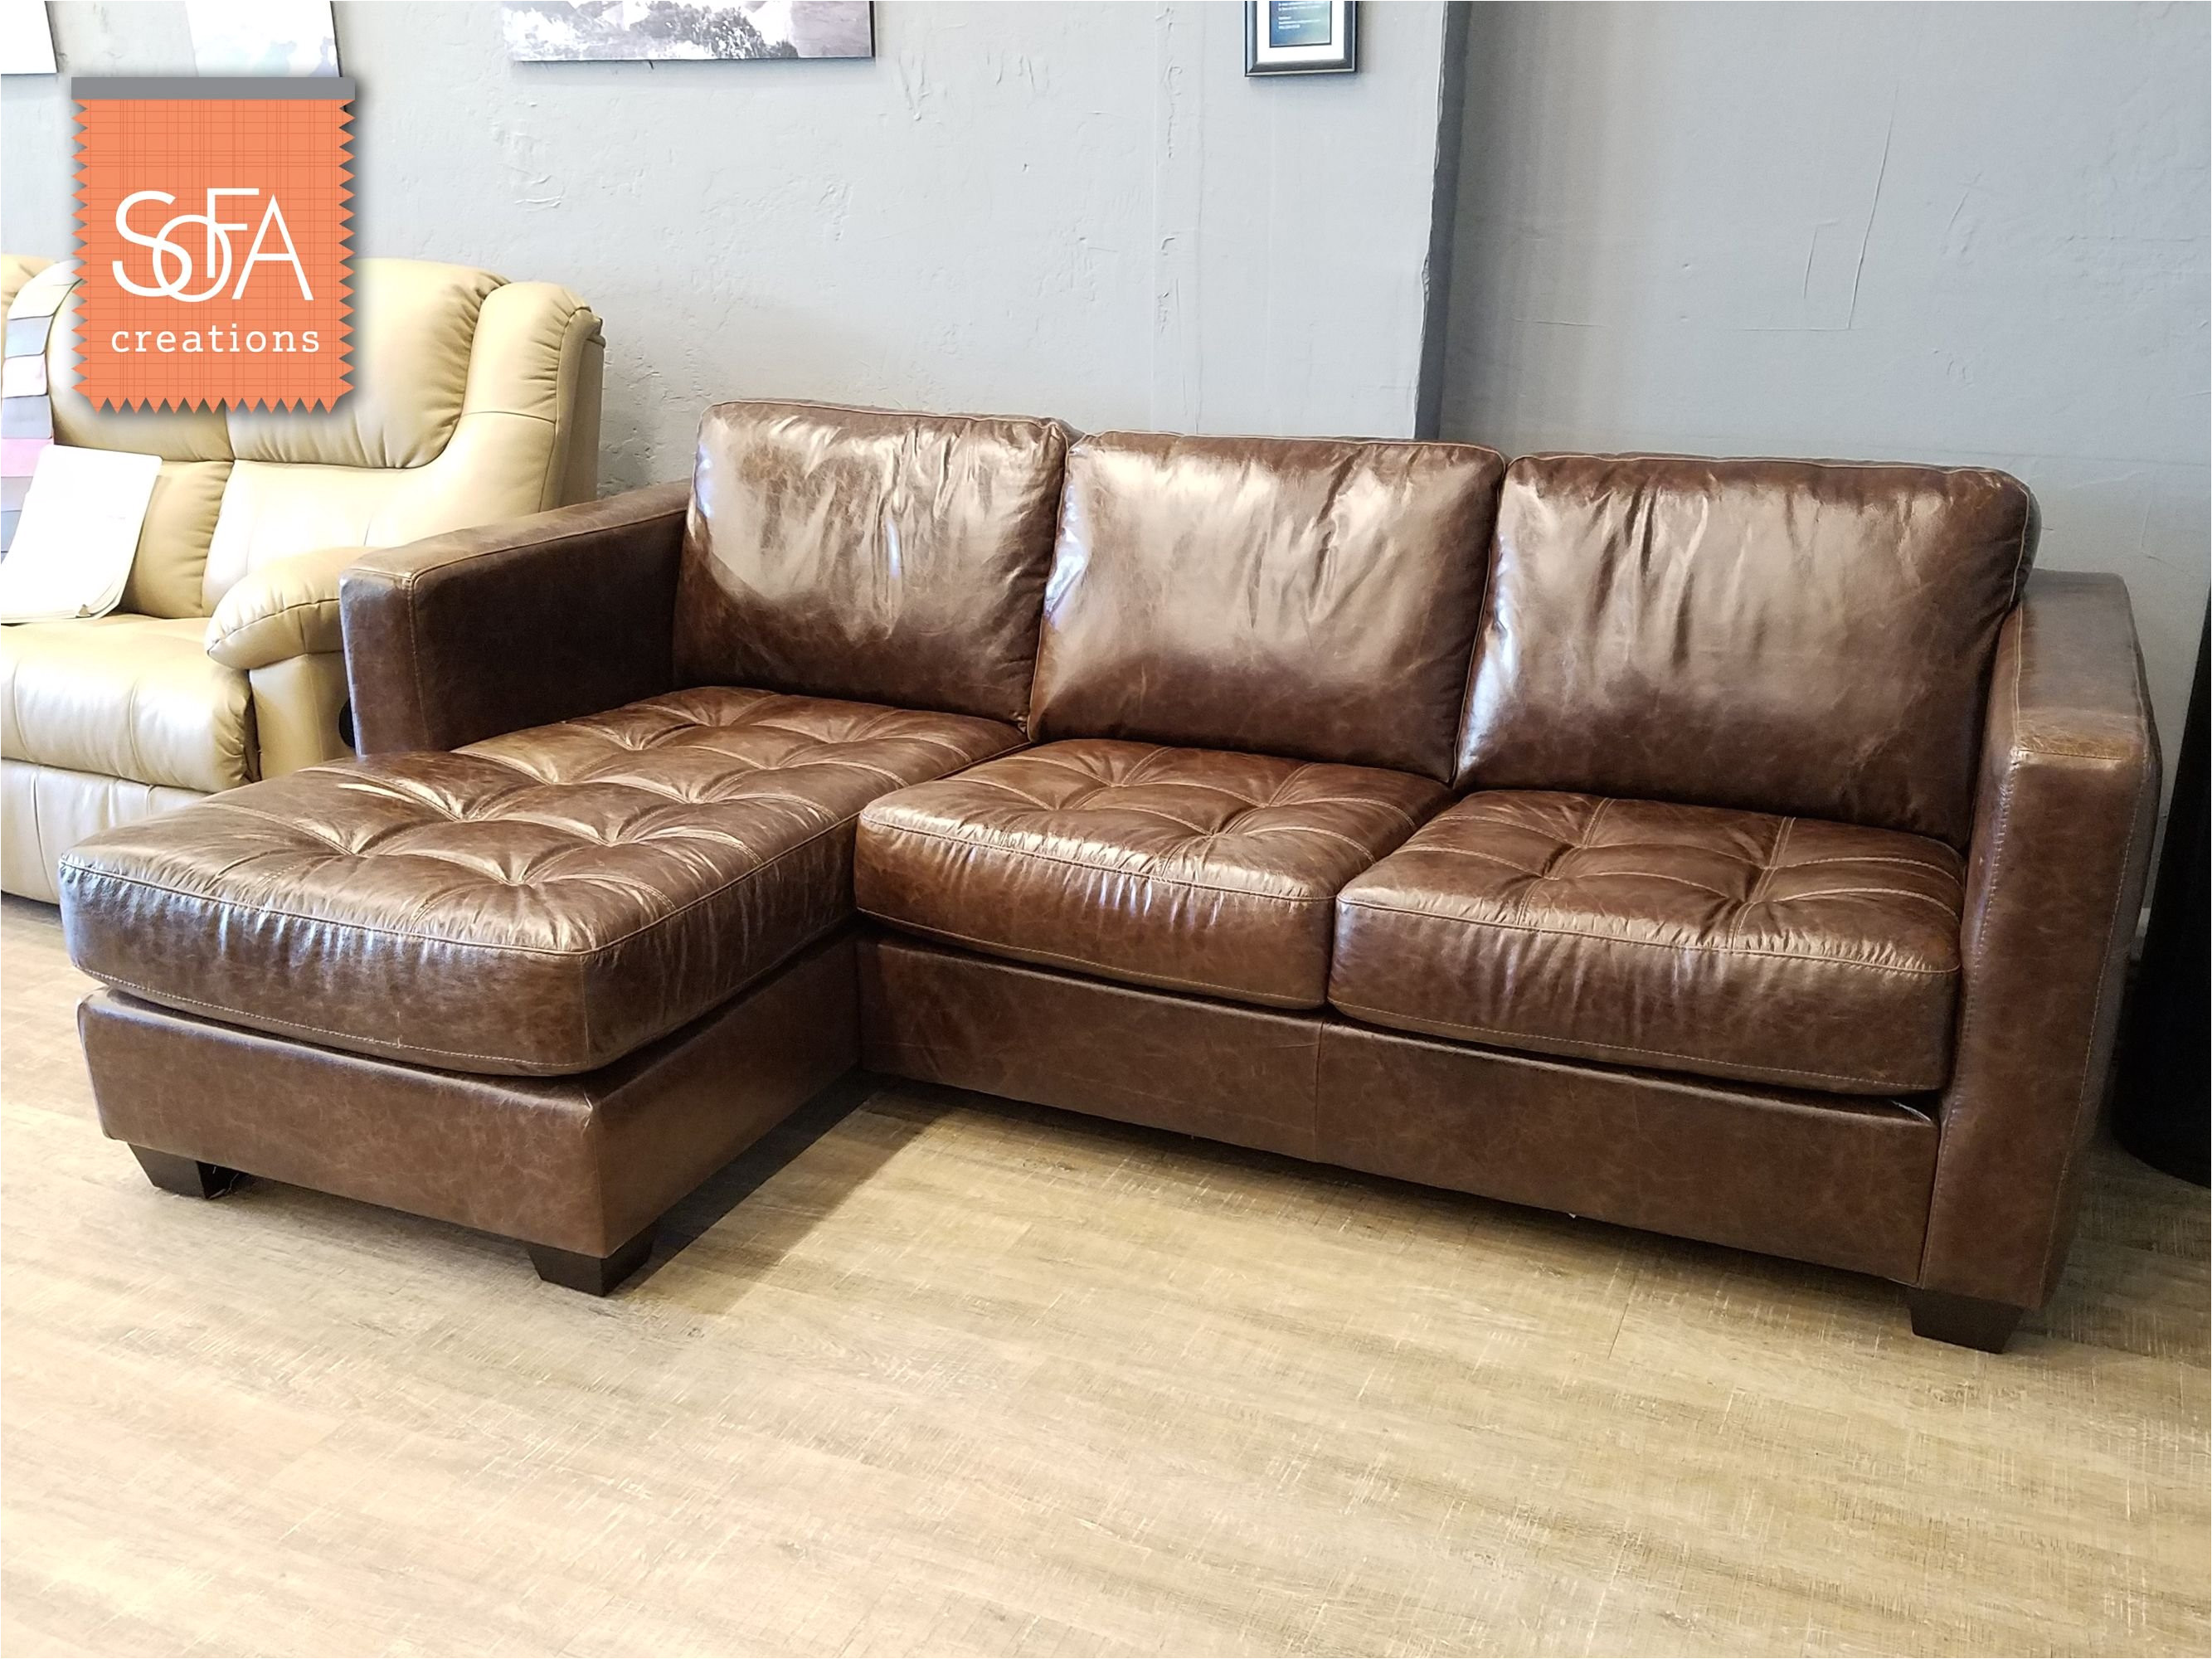 90 inch sectional sofa inspiration barrett top grain leather sectional featuring a stylish tufting